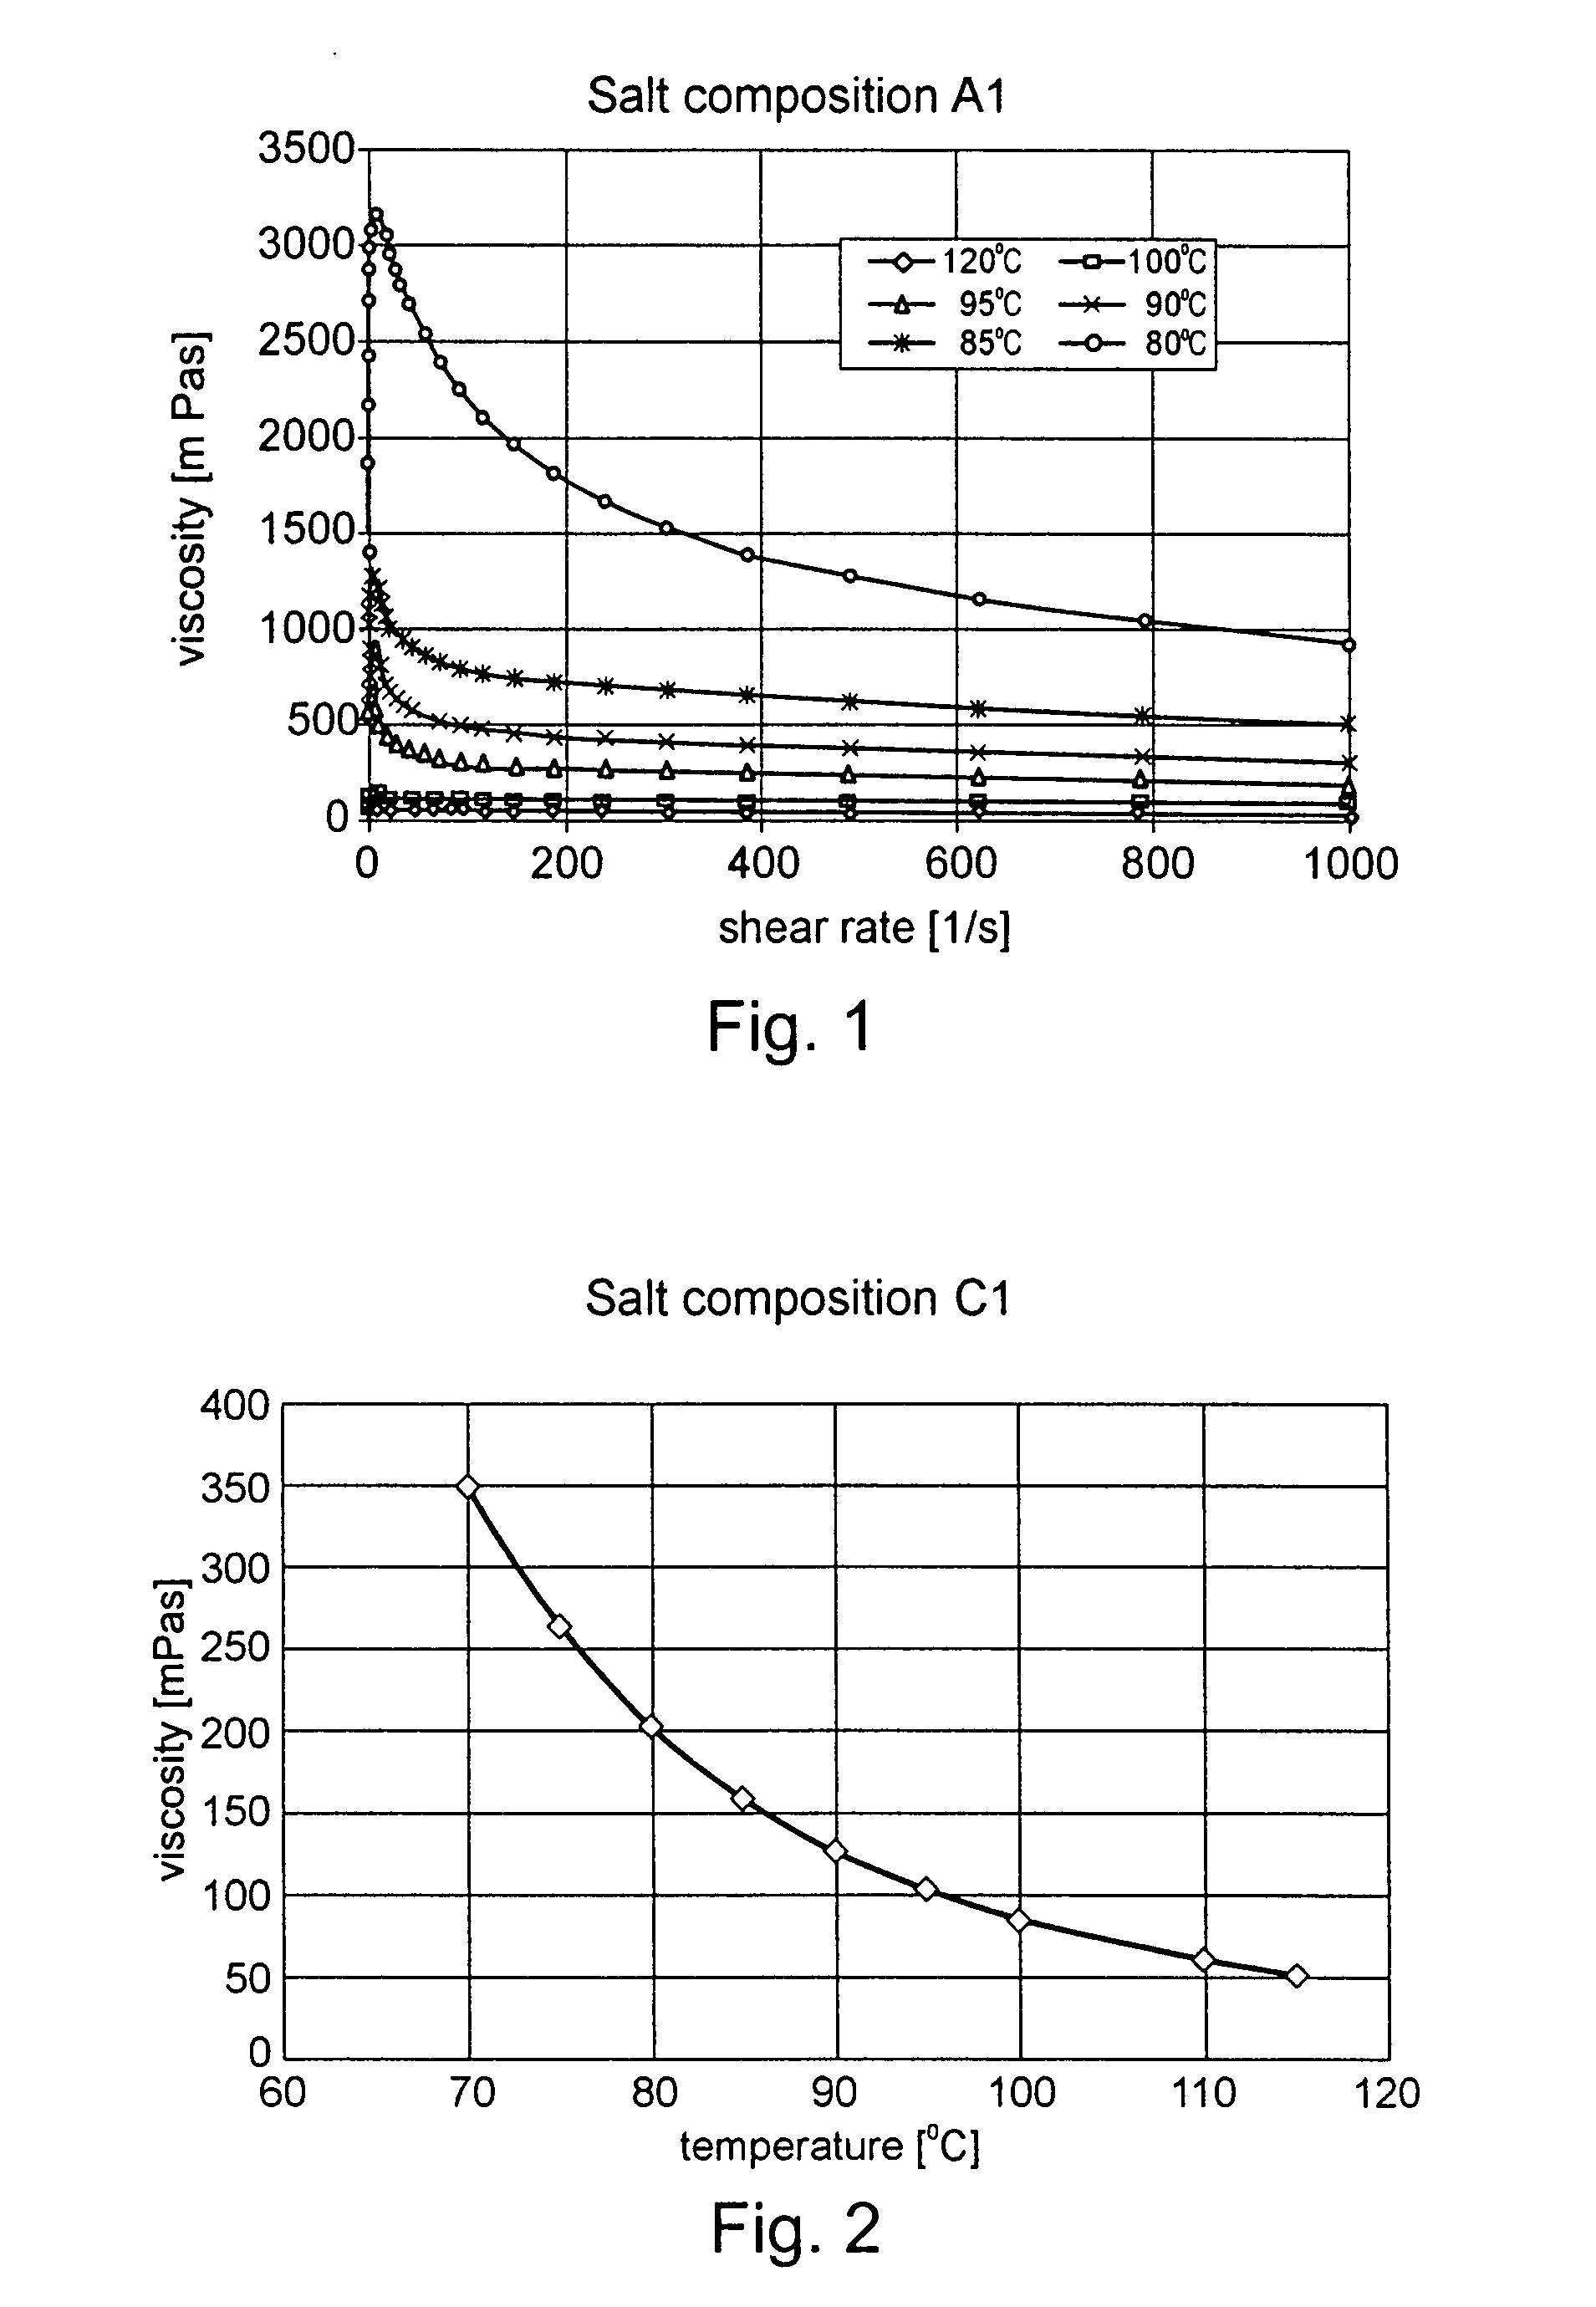 Multinary salt system for storing and transferring thermal energy